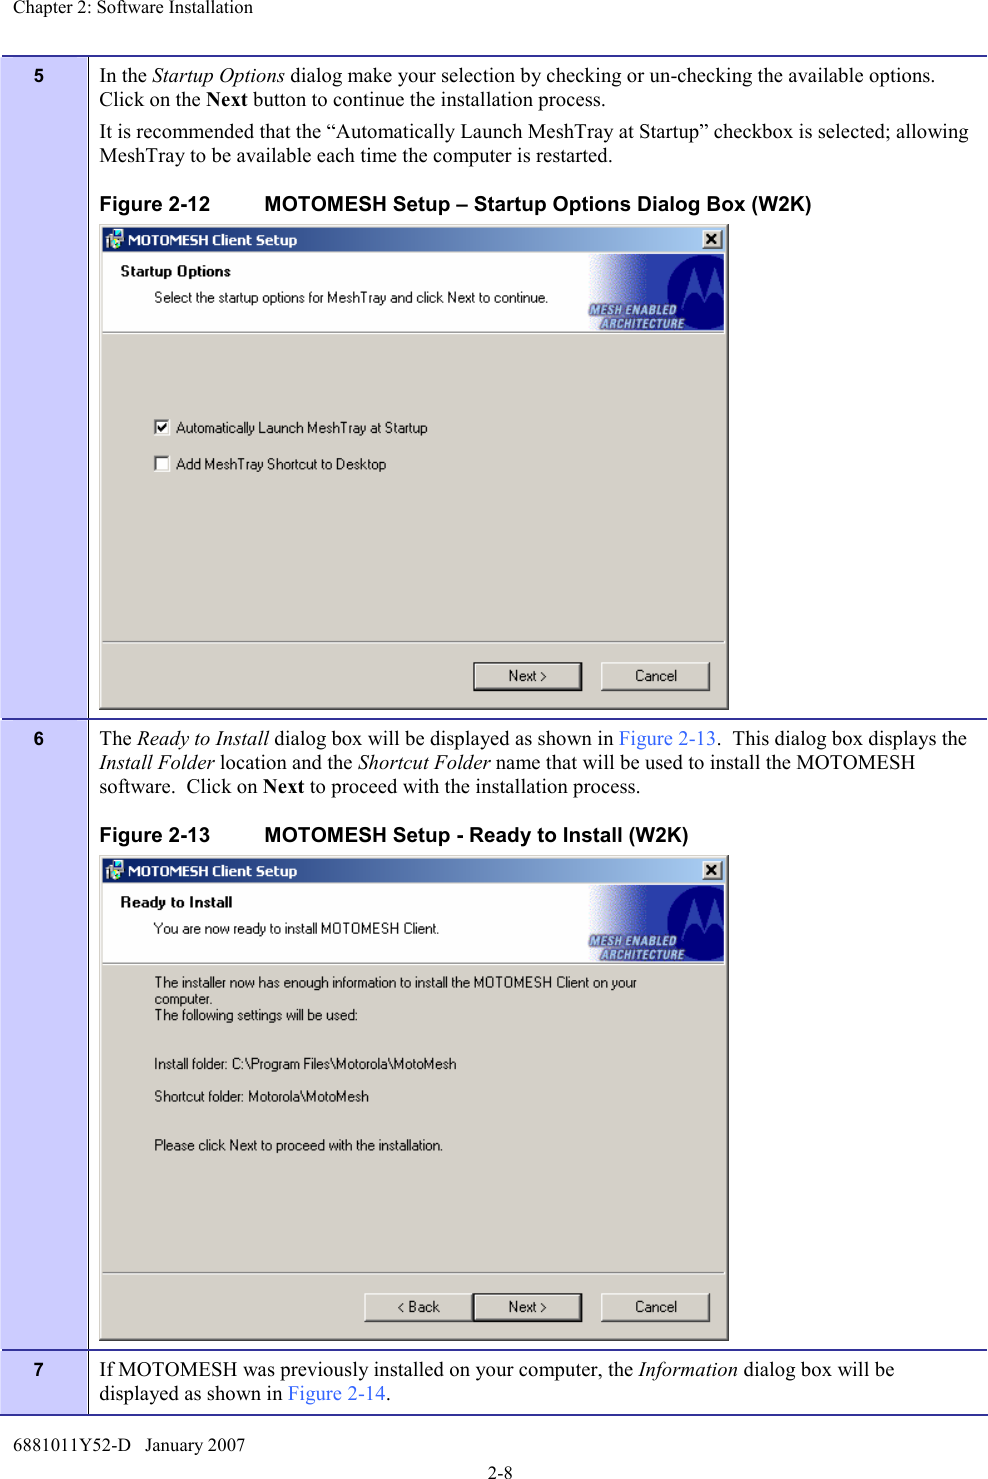 Chapter 2: Software Installation 6881011Y52-D   January 2007 2-8 5  In the Startup Options dialog make your selection by checking or un-checking the available options.  Click on the Next button to continue the installation process. It is recommended that the “Automatically Launch MeshTray at Startup” checkbox is selected; allowing MeshTray to be available each time the computer is restarted. Figure 2-12  MOTOMESH Setup – Startup Options Dialog Box (W2K)  6  The Ready to Install dialog box will be displayed as shown in Figure 2-13.  This dialog box displays the Install Folder location and the Shortcut Folder name that will be used to install the MOTOMESH software.  Click on Next to proceed with the installation process. Figure 2-13  MOTOMESH Setup - Ready to Install (W2K)  7  If MOTOMESH was previously installed on your computer, the Information dialog box will be displayed as shown in Figure 2-14.   